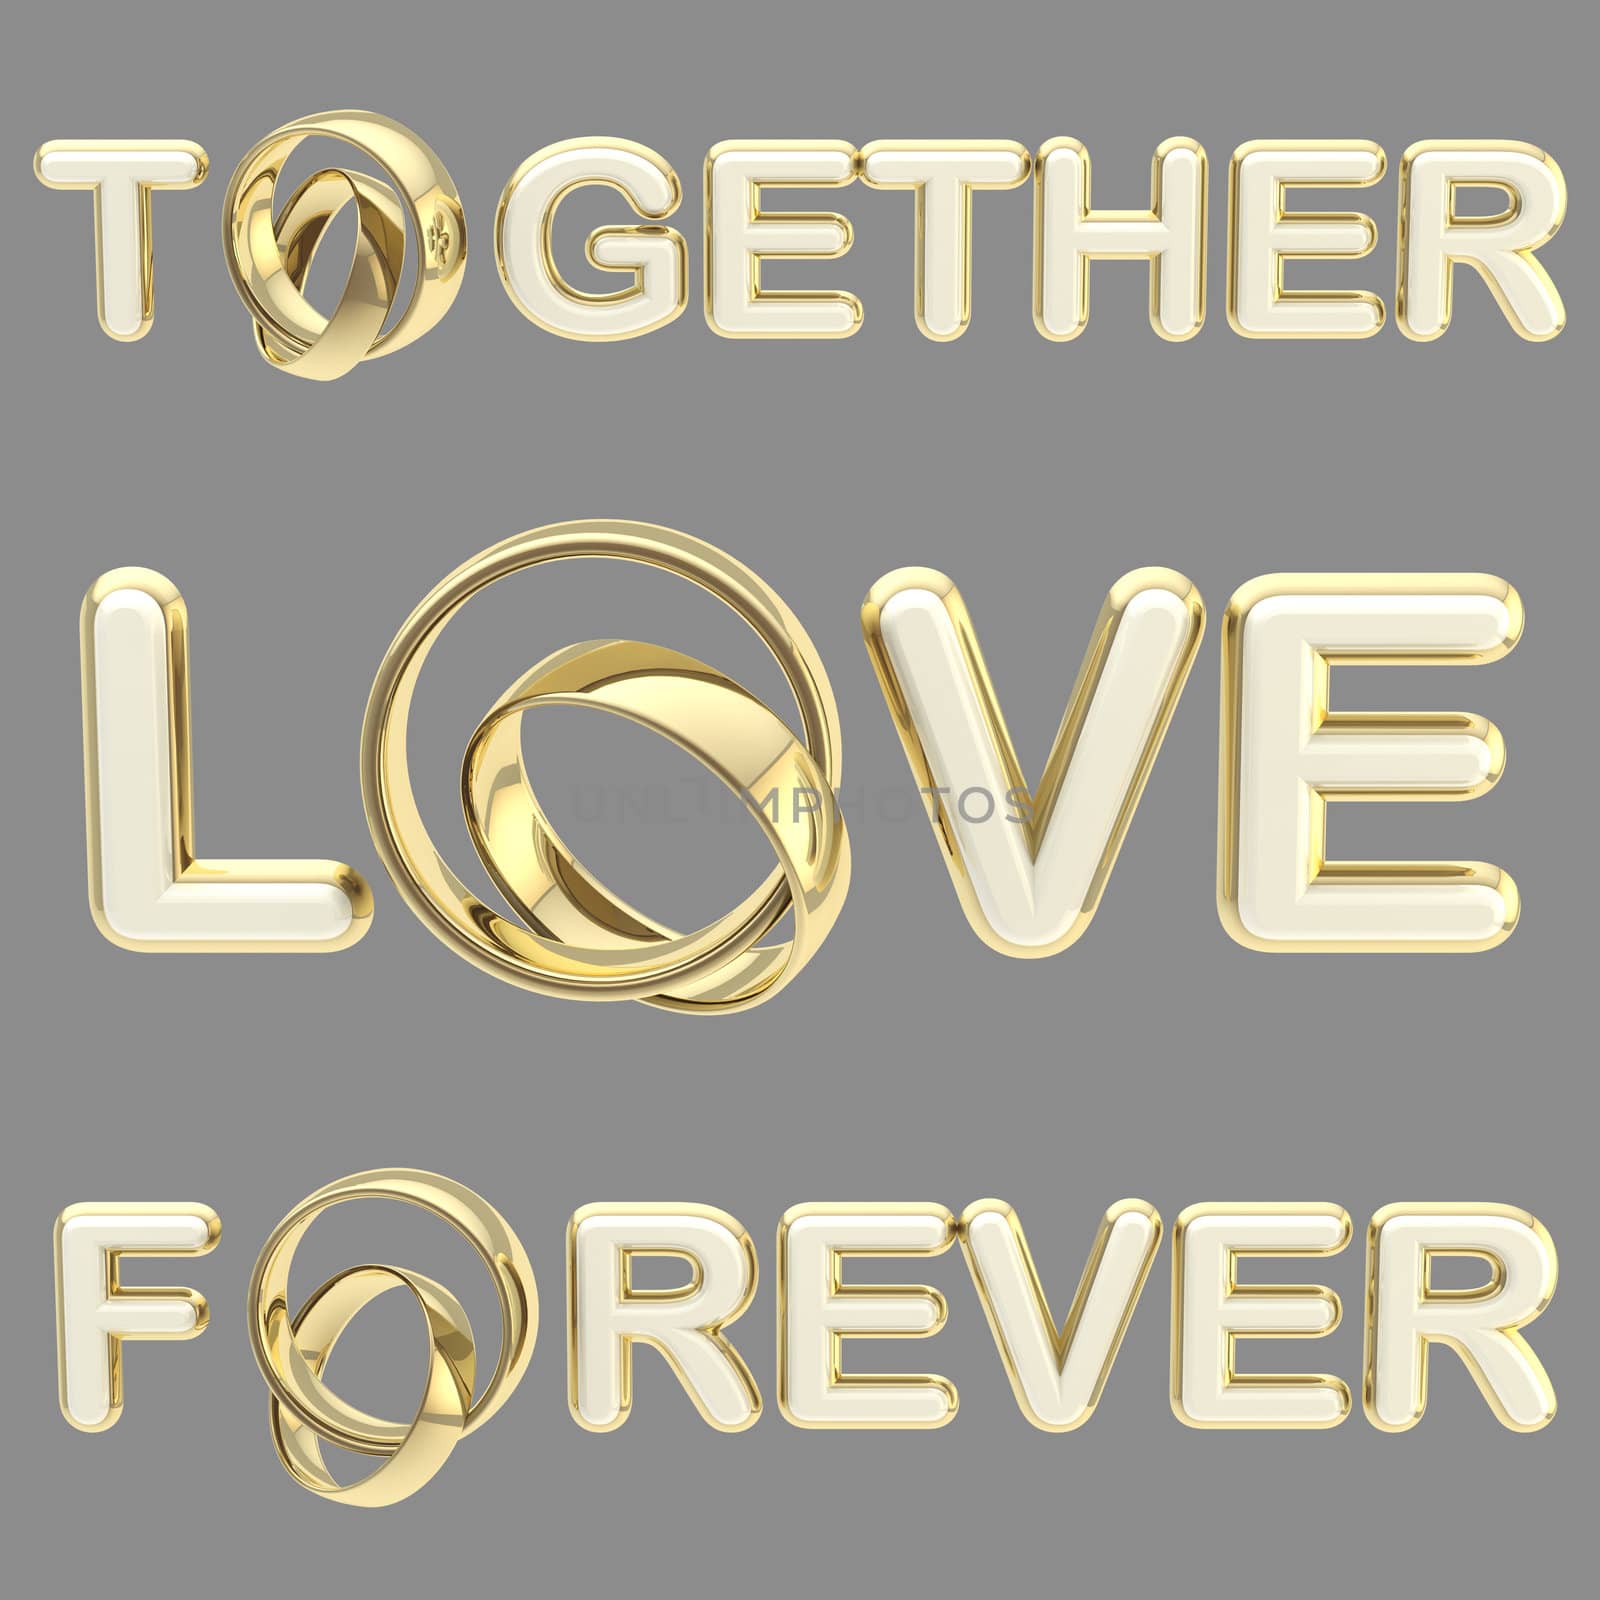 "Love", "together", "forever" words isolated by nbvf